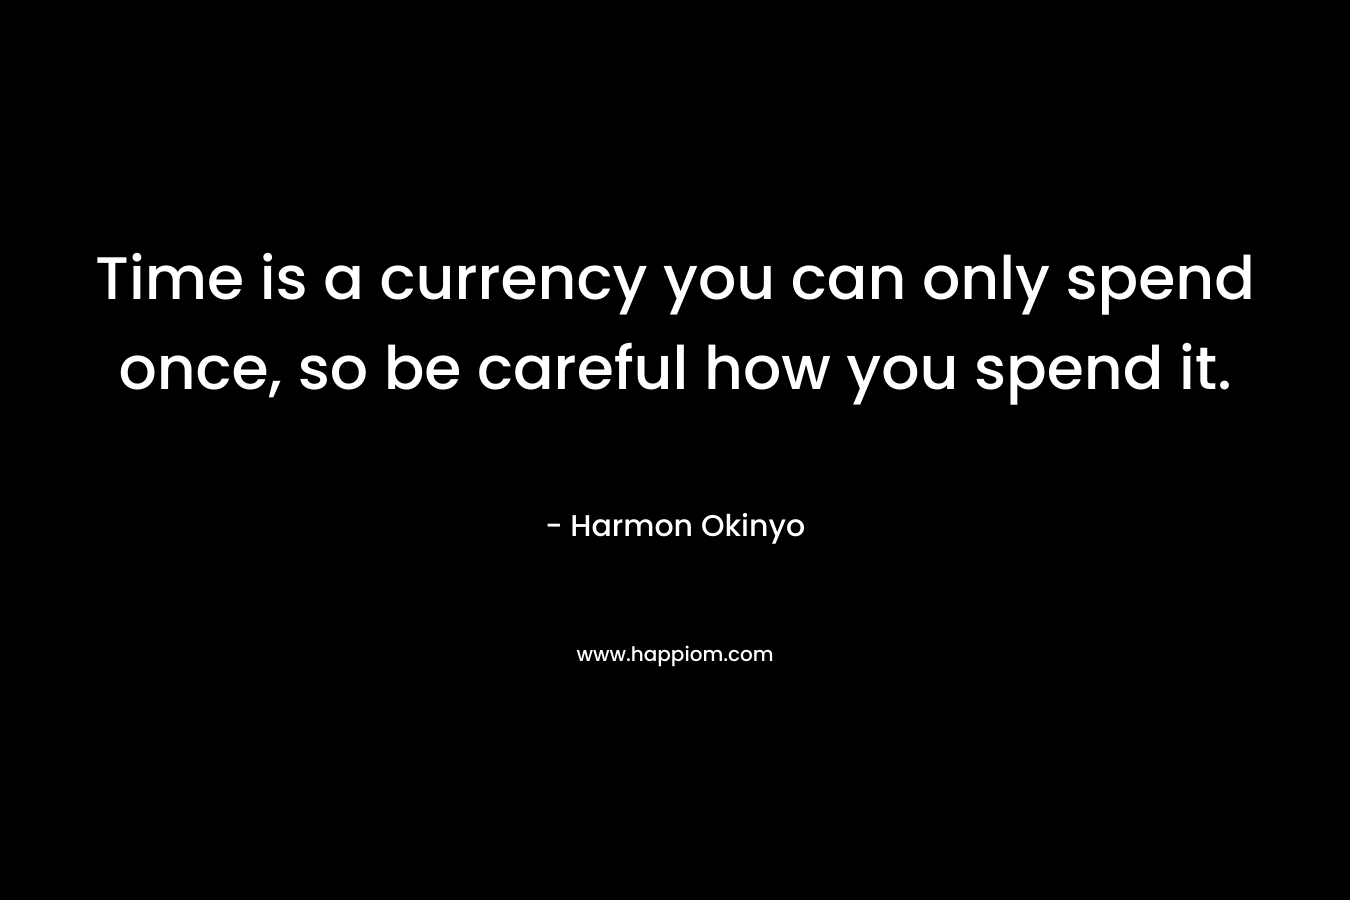 Time is a currency you can only spend once, so be careful how you spend it. – Harmon Okinyo